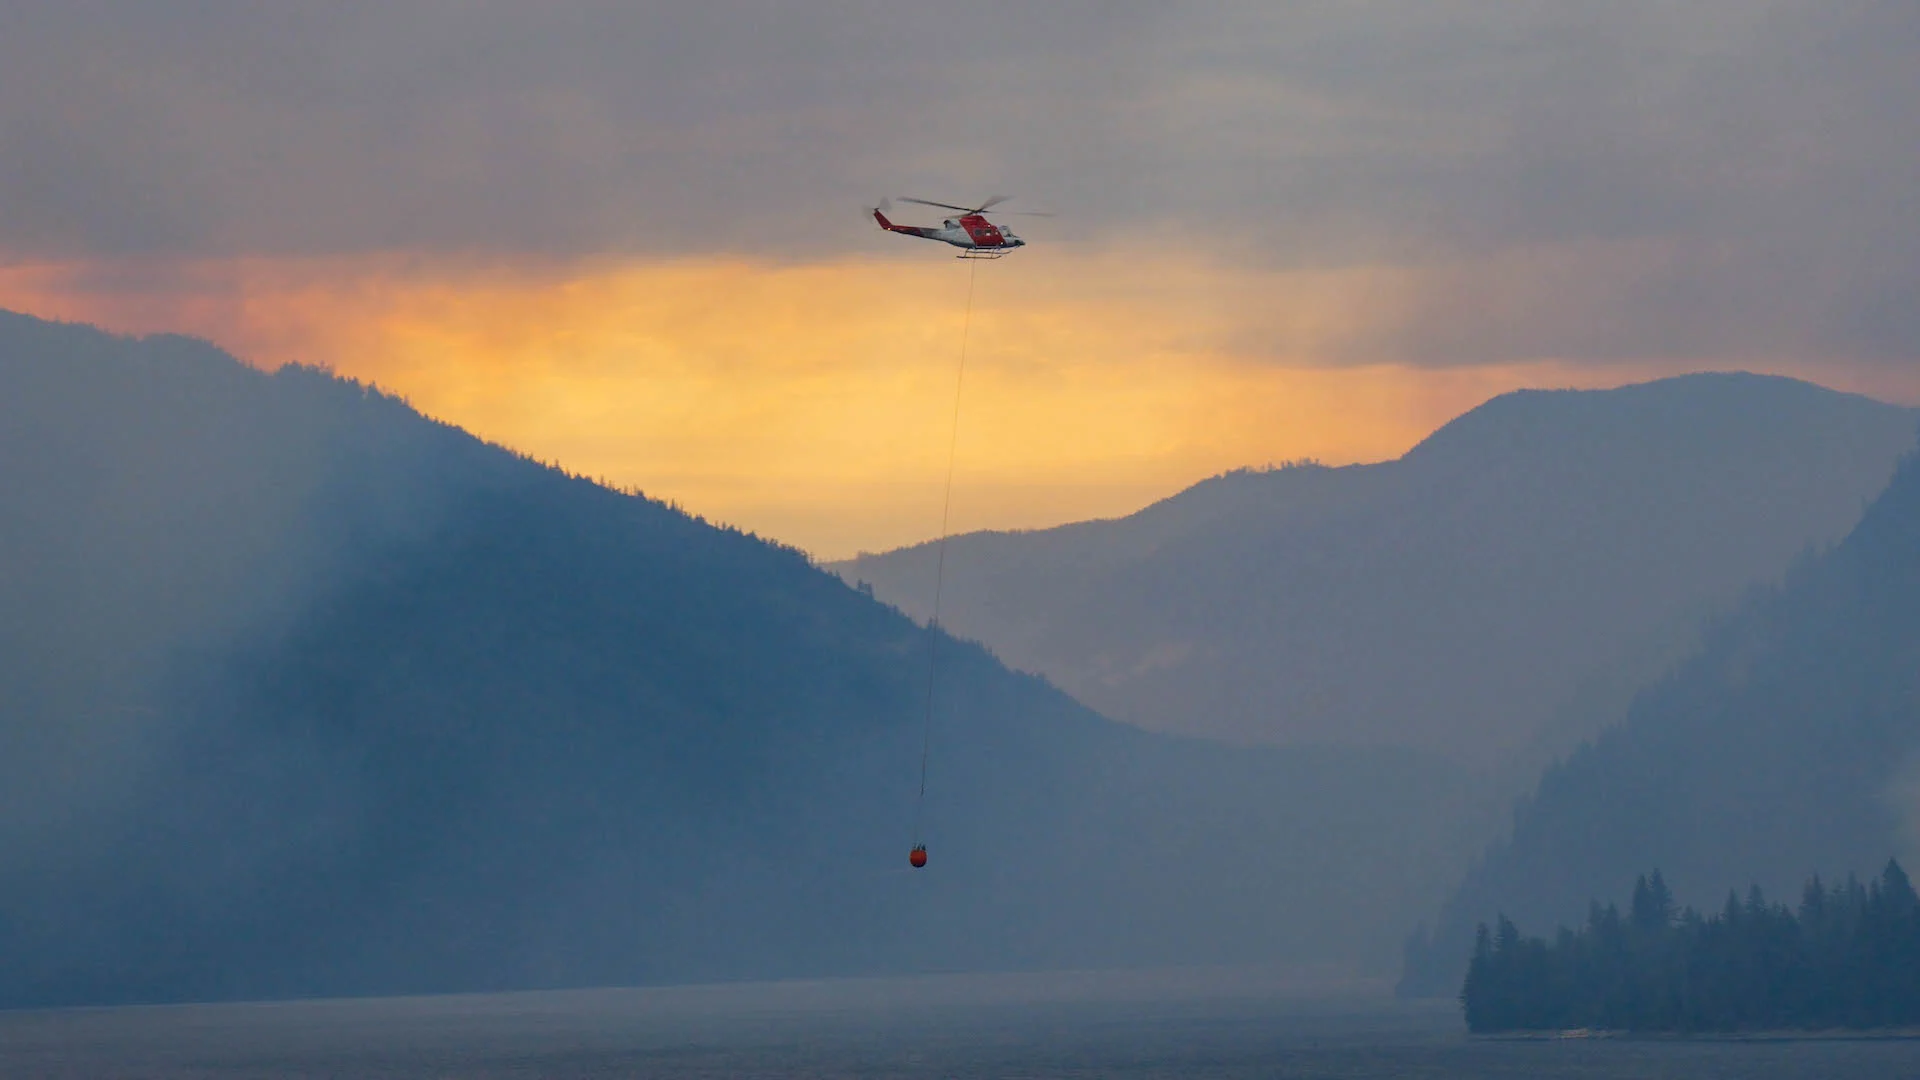 No reprieve in sight for B.C.'s prolonged drought and wildfires